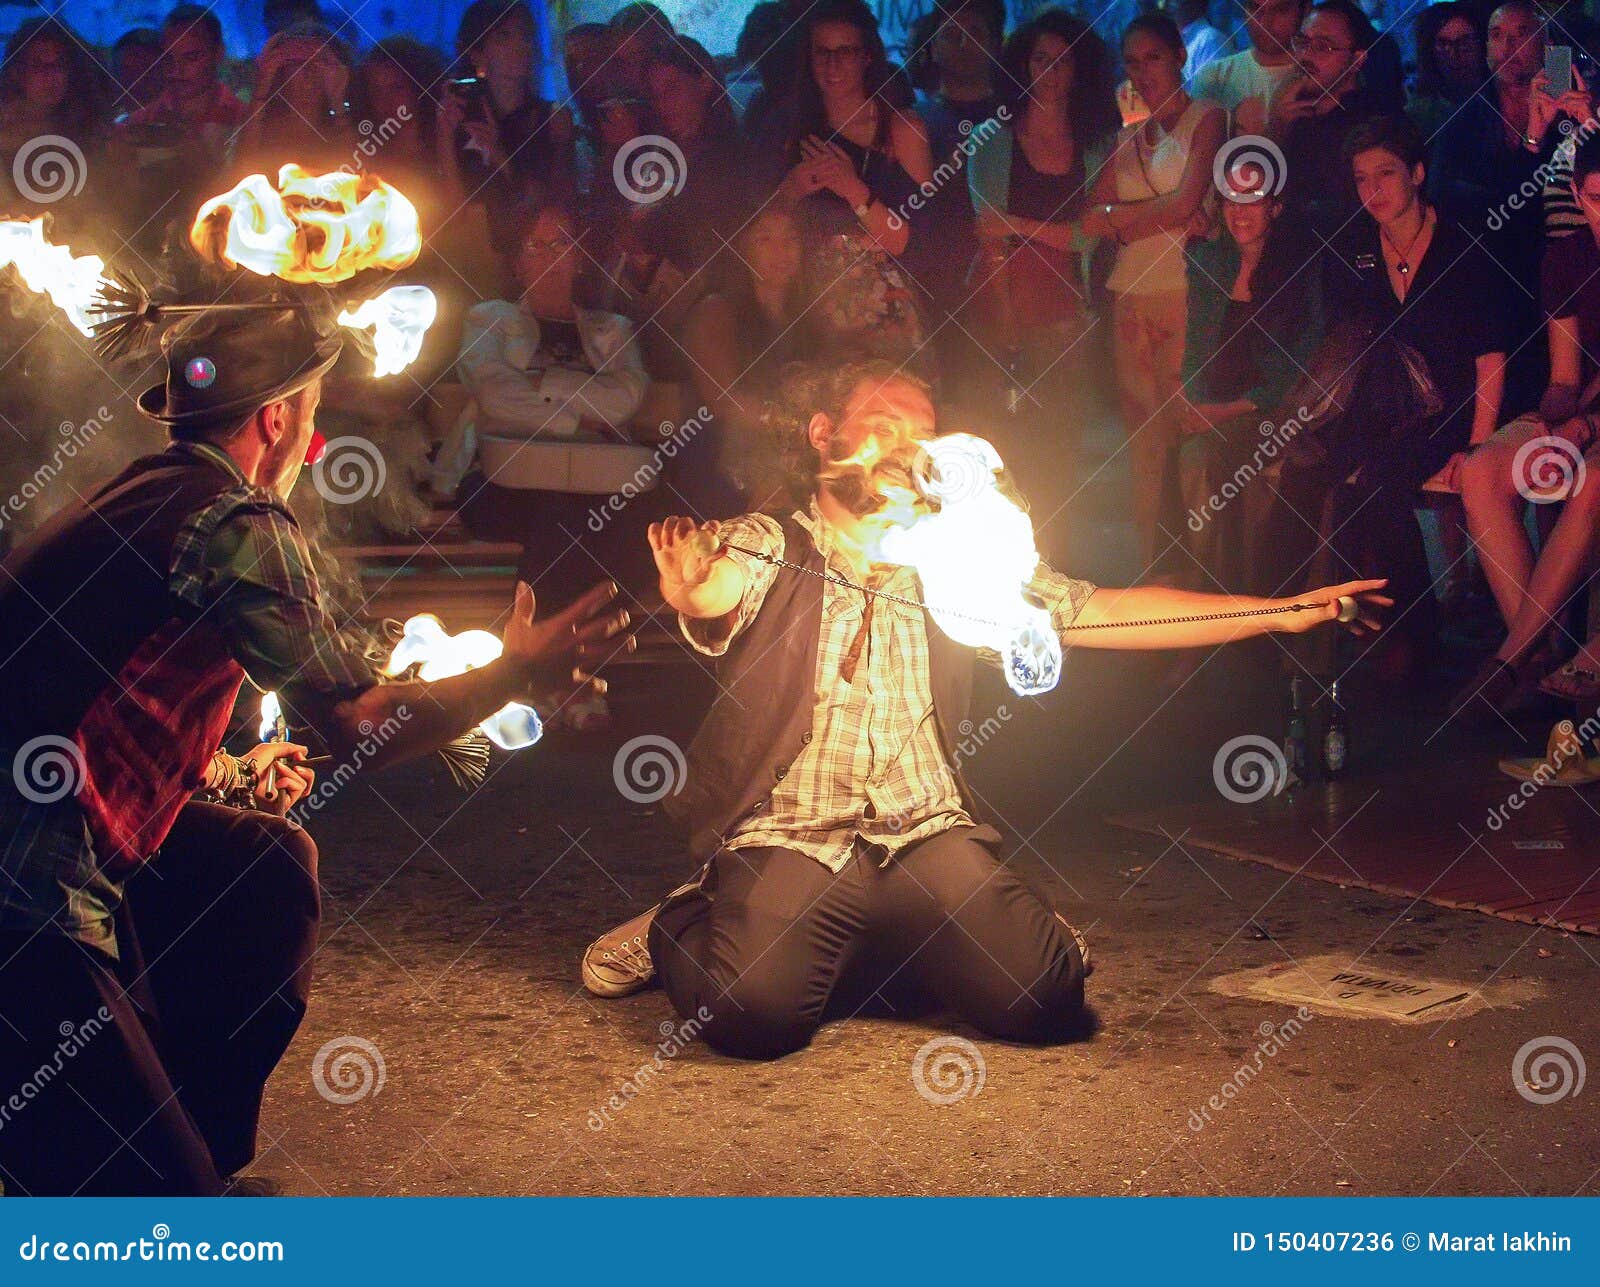 circus-arists-play-fire-catania-italy-15